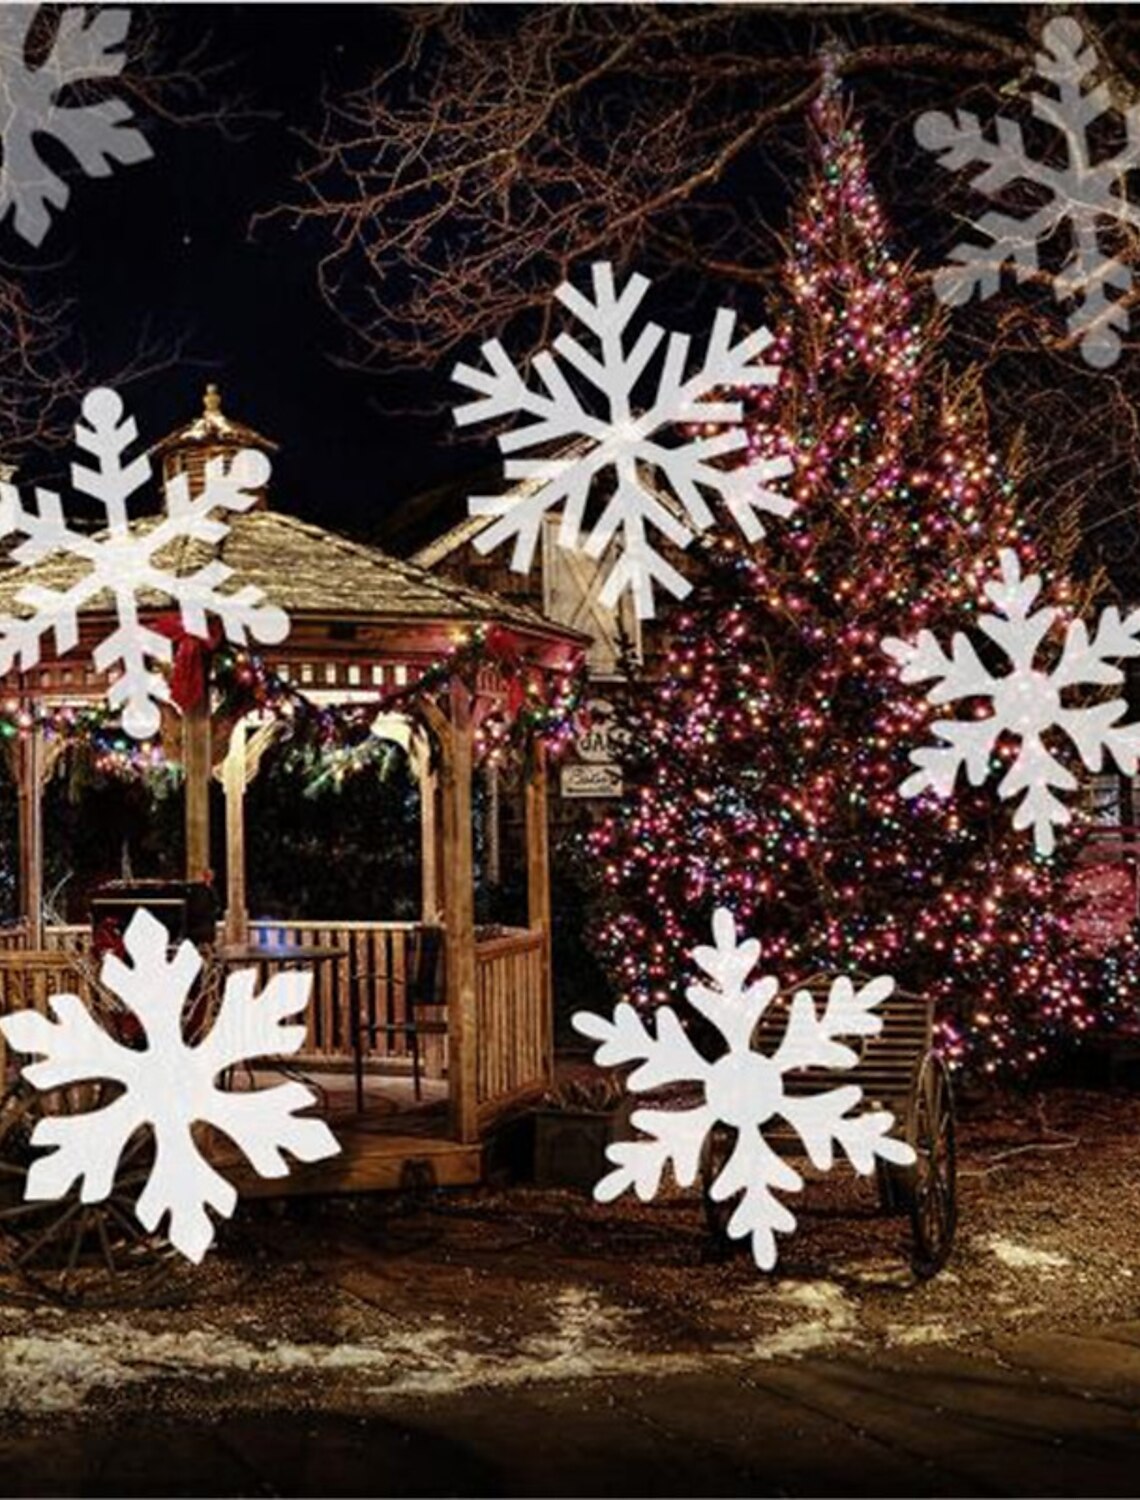 Christmas Pathway Lights Christmas Garden Light Decorative Garden Display LED Light Warm White Battery Operated for Indoor and Outdoor Holiday Decoration 5pcs,Snowflake